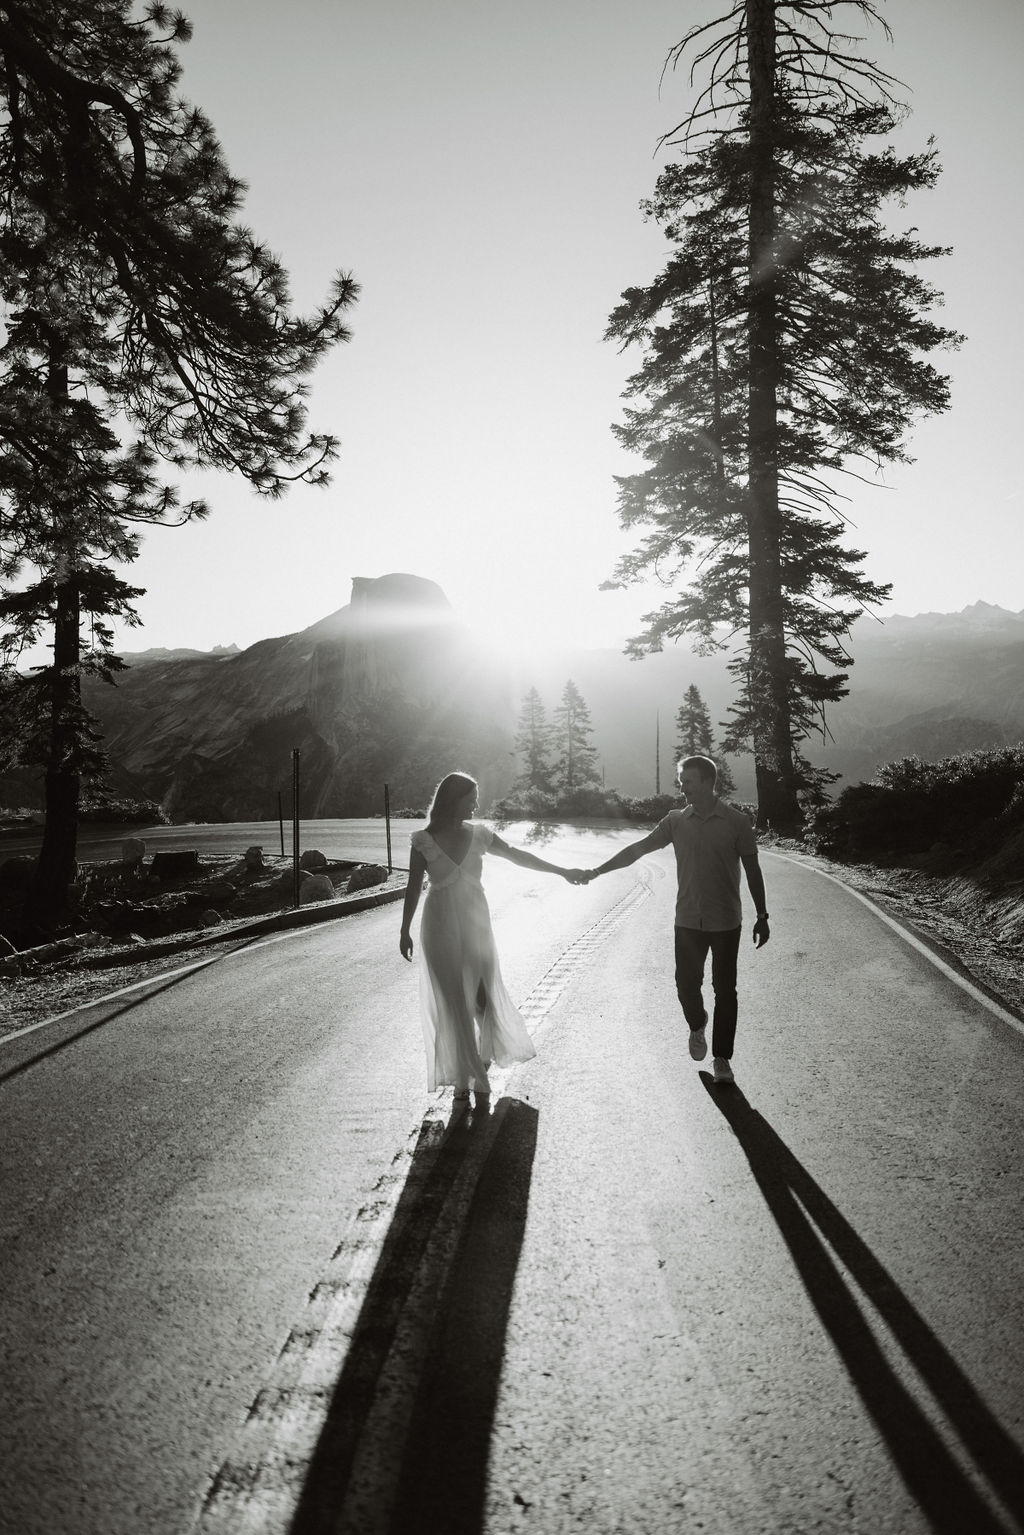 A man and a woman run down a rural, tree-lined road at sunset, with mountains visible in the background during their glacier point engagement photos